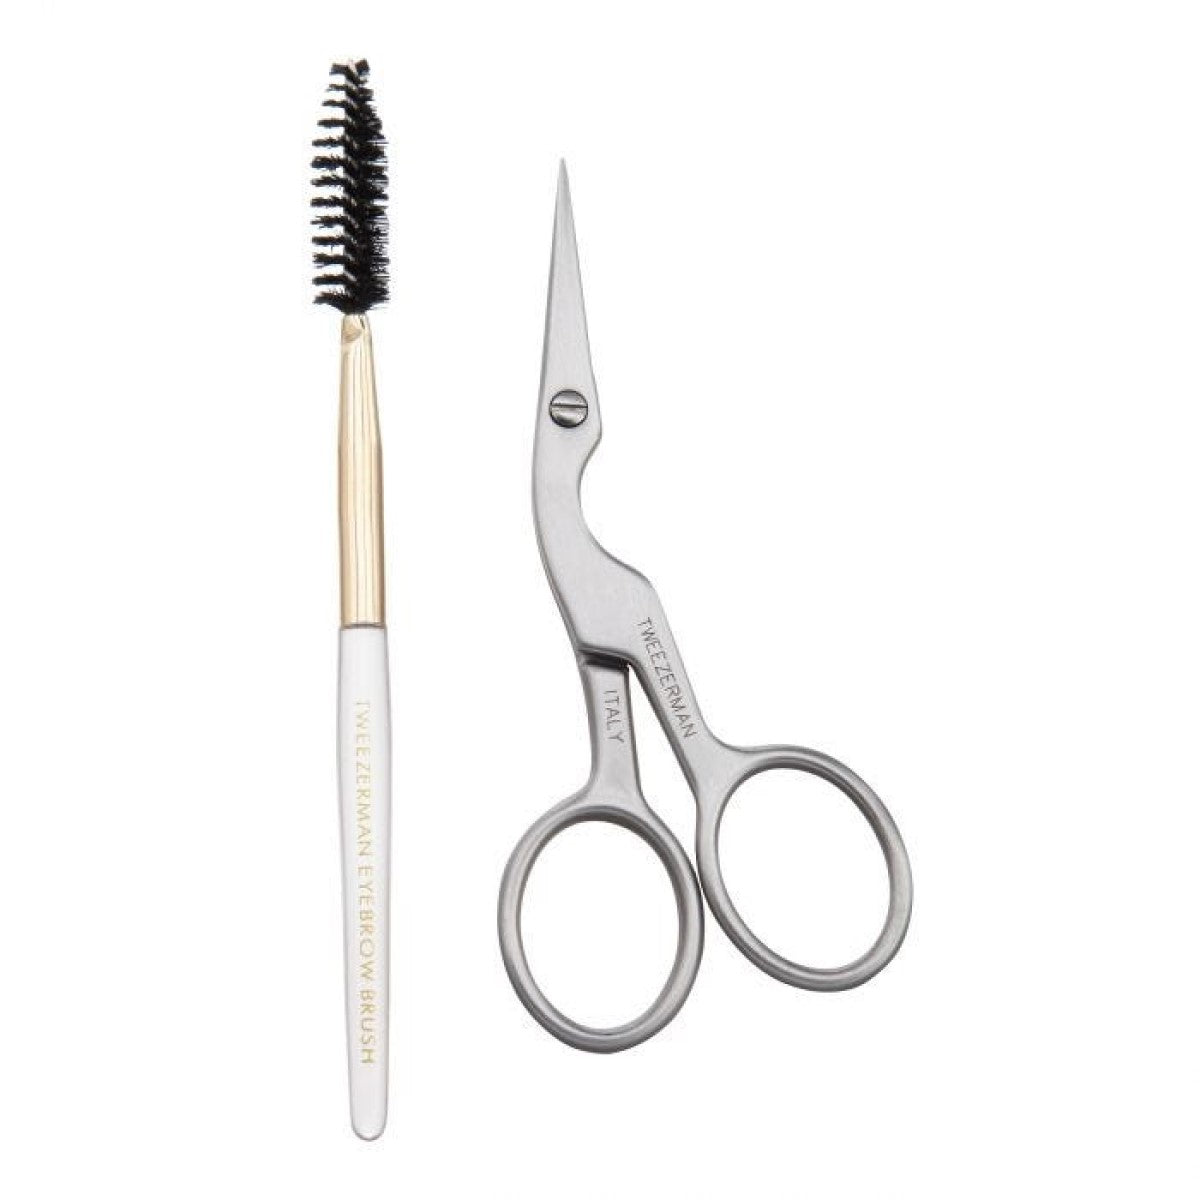 Primary Image of Brow Shaping Scissors and Brush